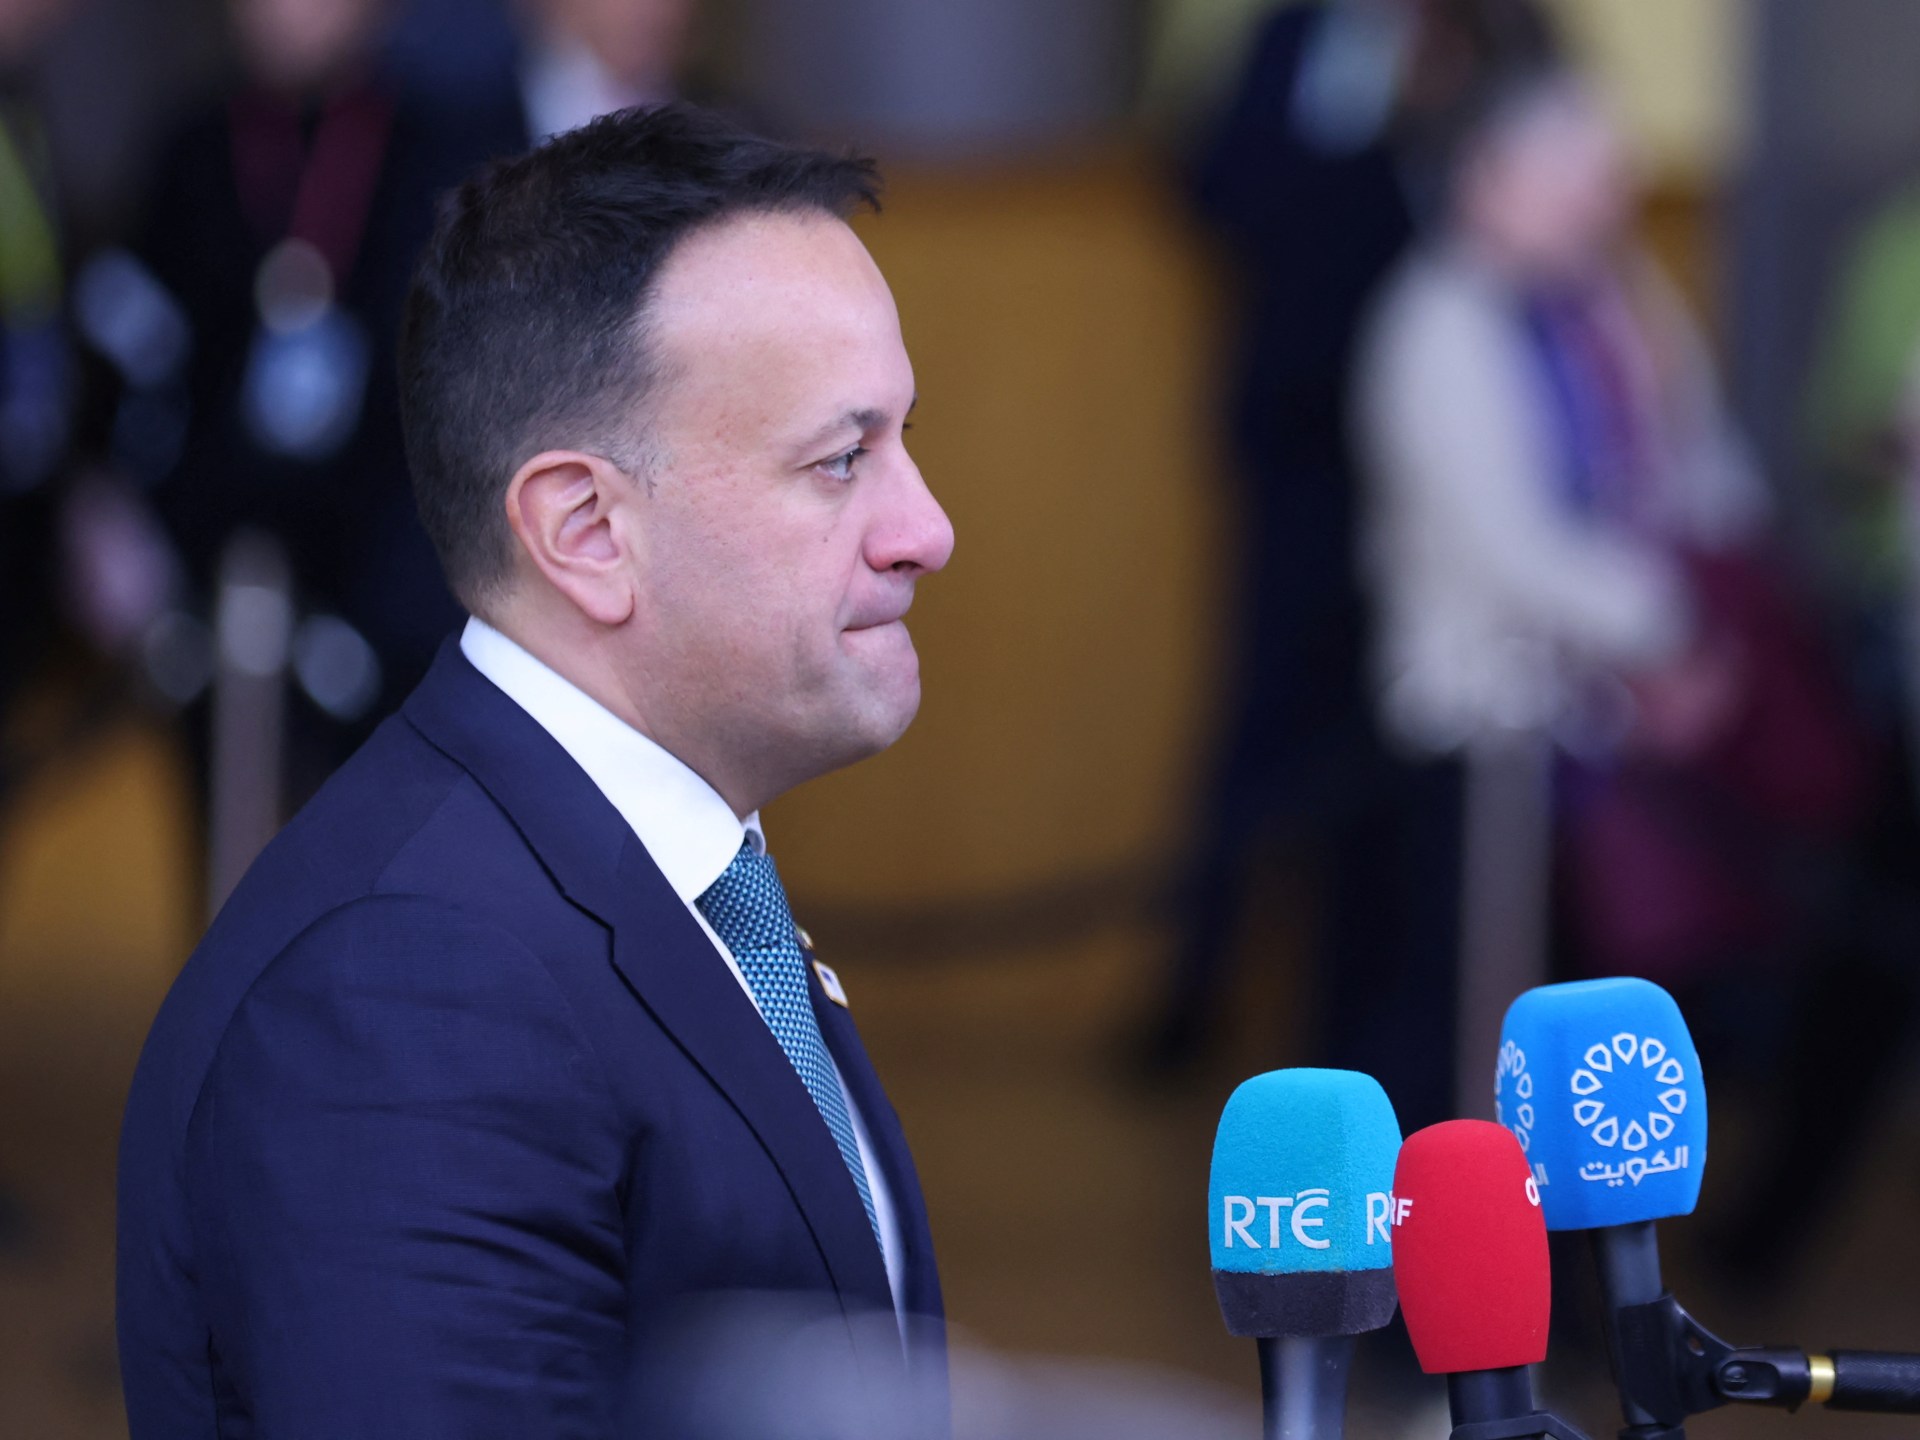 Irish PM urges EU leaders to call for humanitarian ceasefire in Gaza | Israel-Palestine conflict News #Irish #urges #leaders #call #humanitarian #ceasefire #Gaza #IsraelPalestine #conflict #News